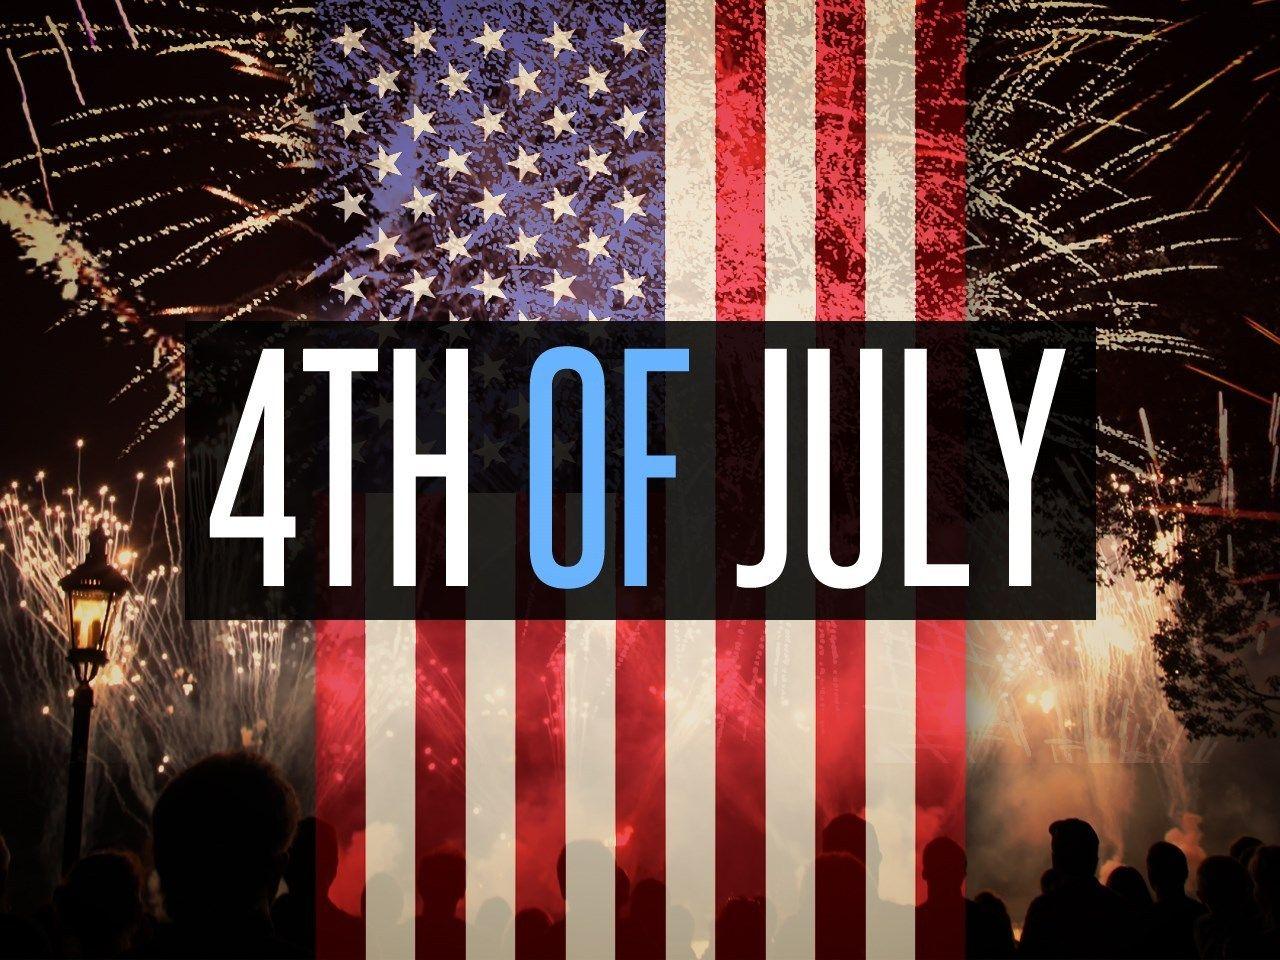 Happy 4th of July Image 2018. Fourth of July Image, Photo